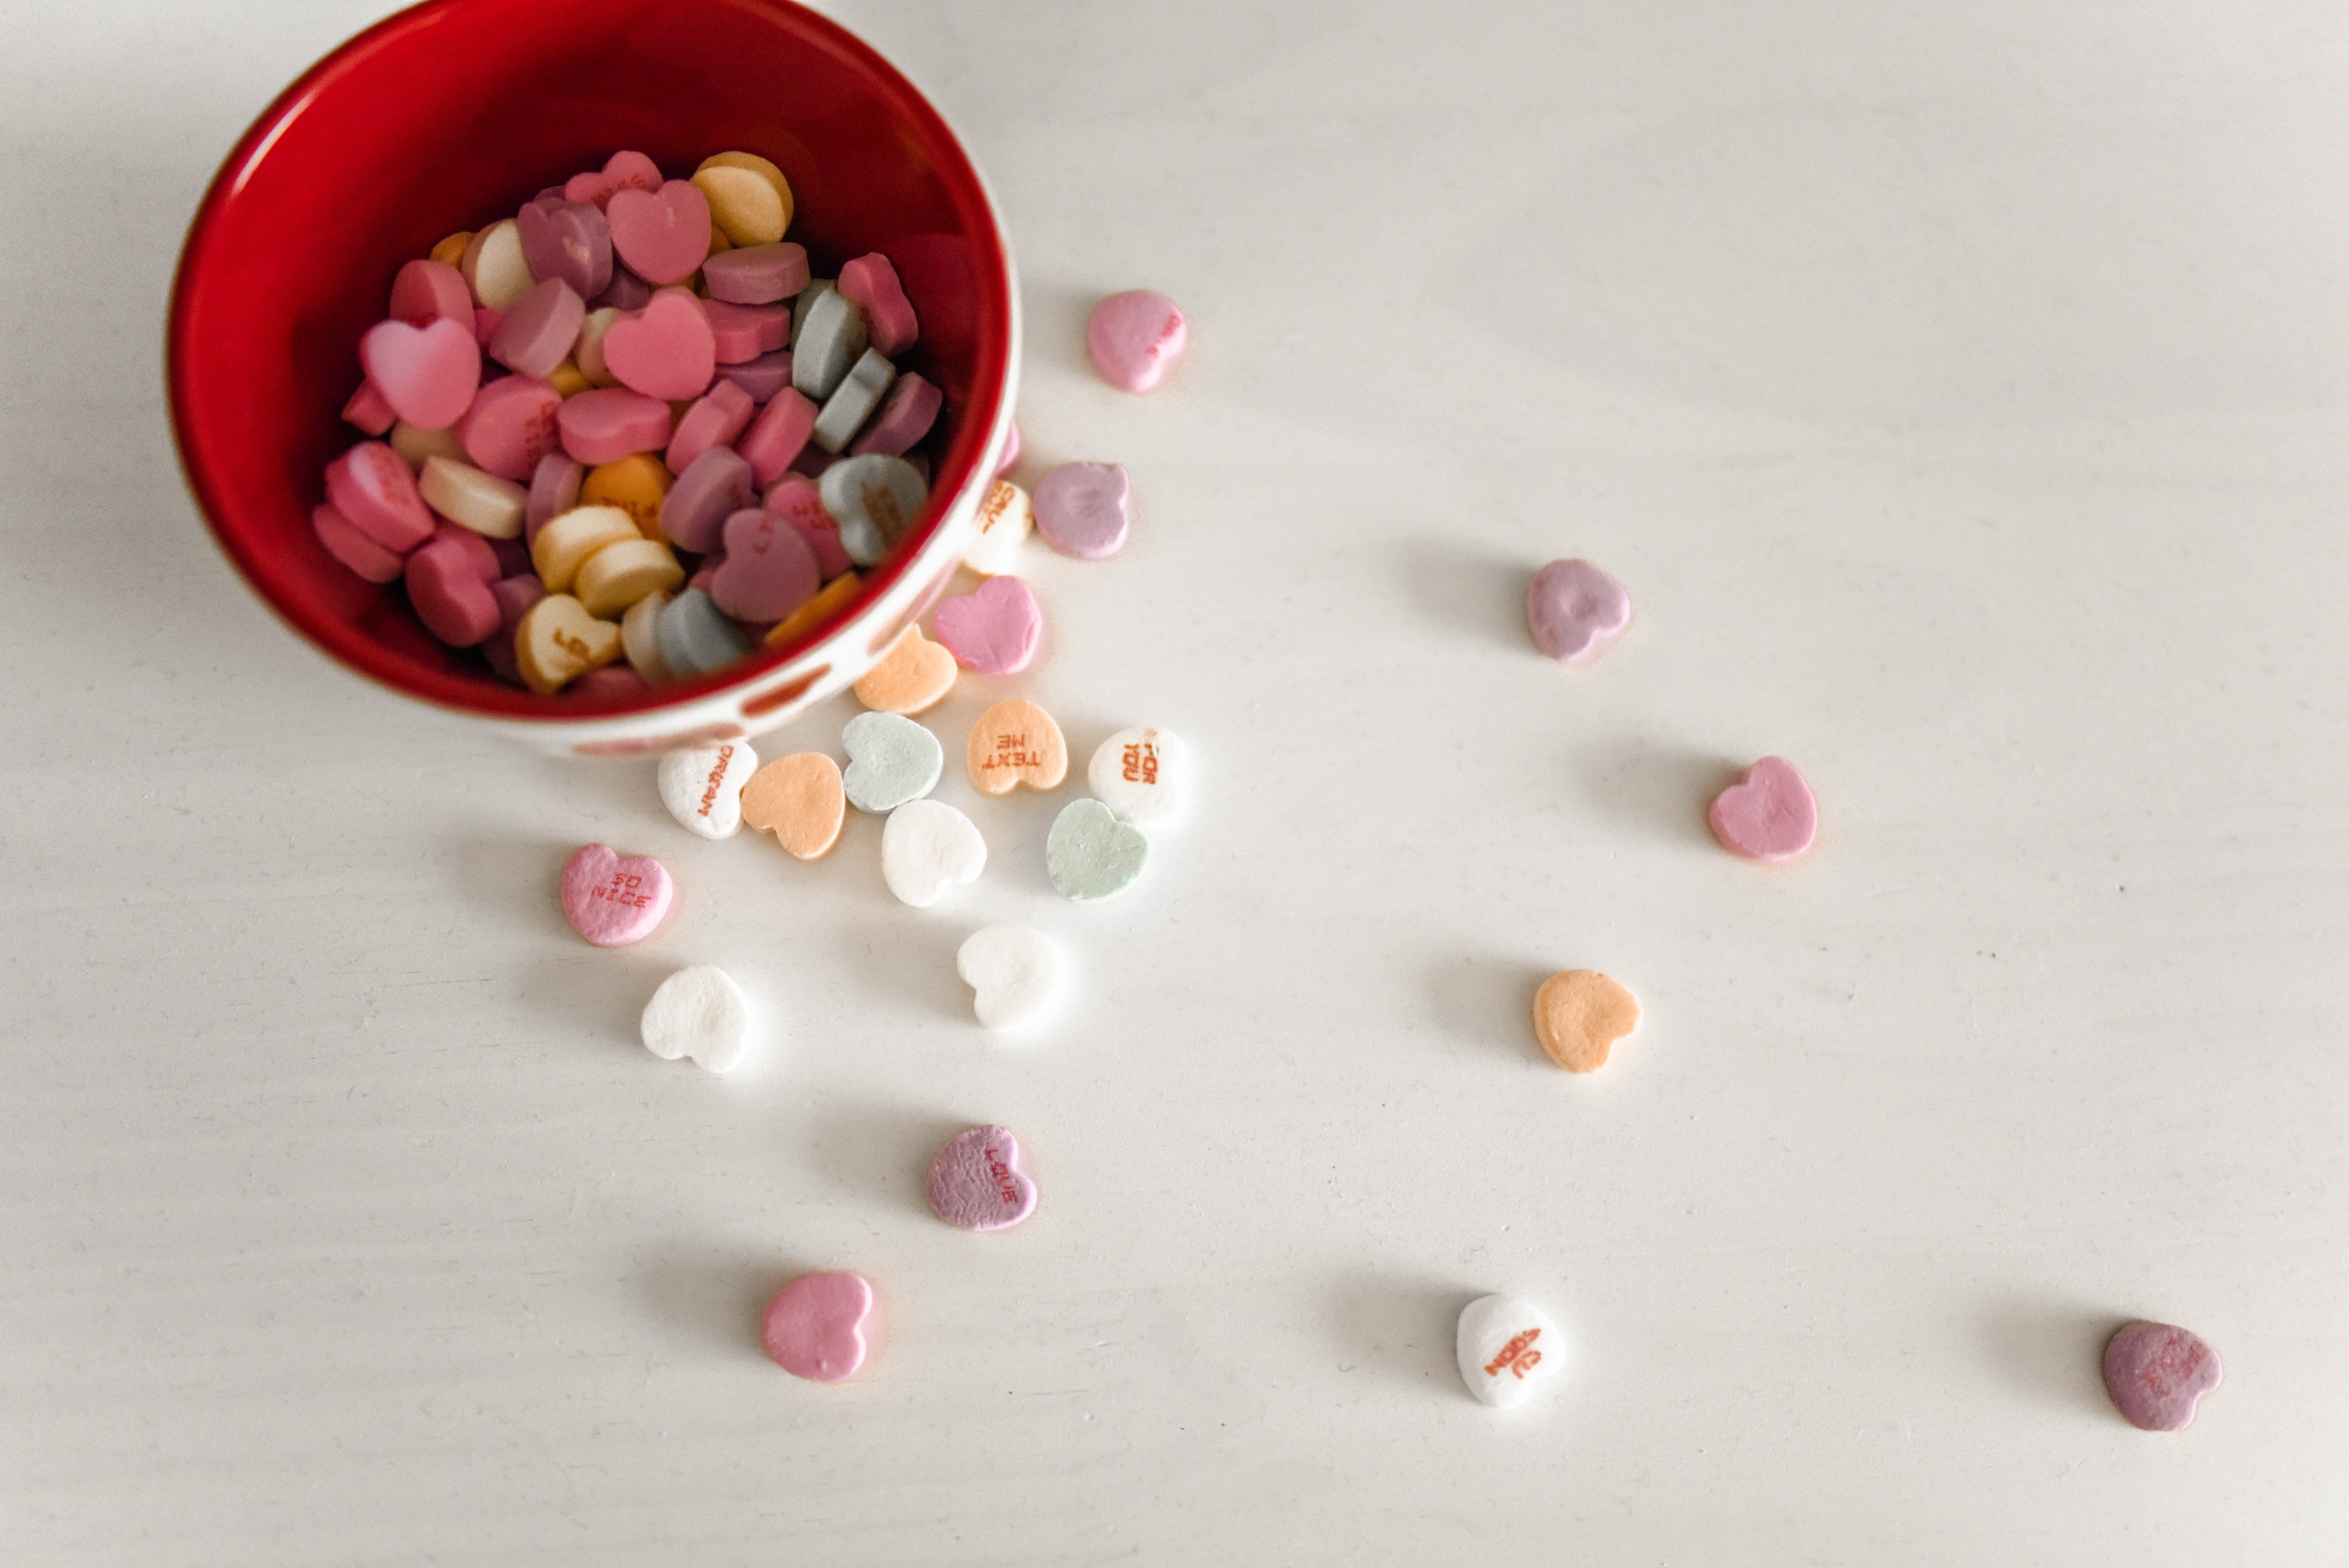 Candy hearts in a bowl